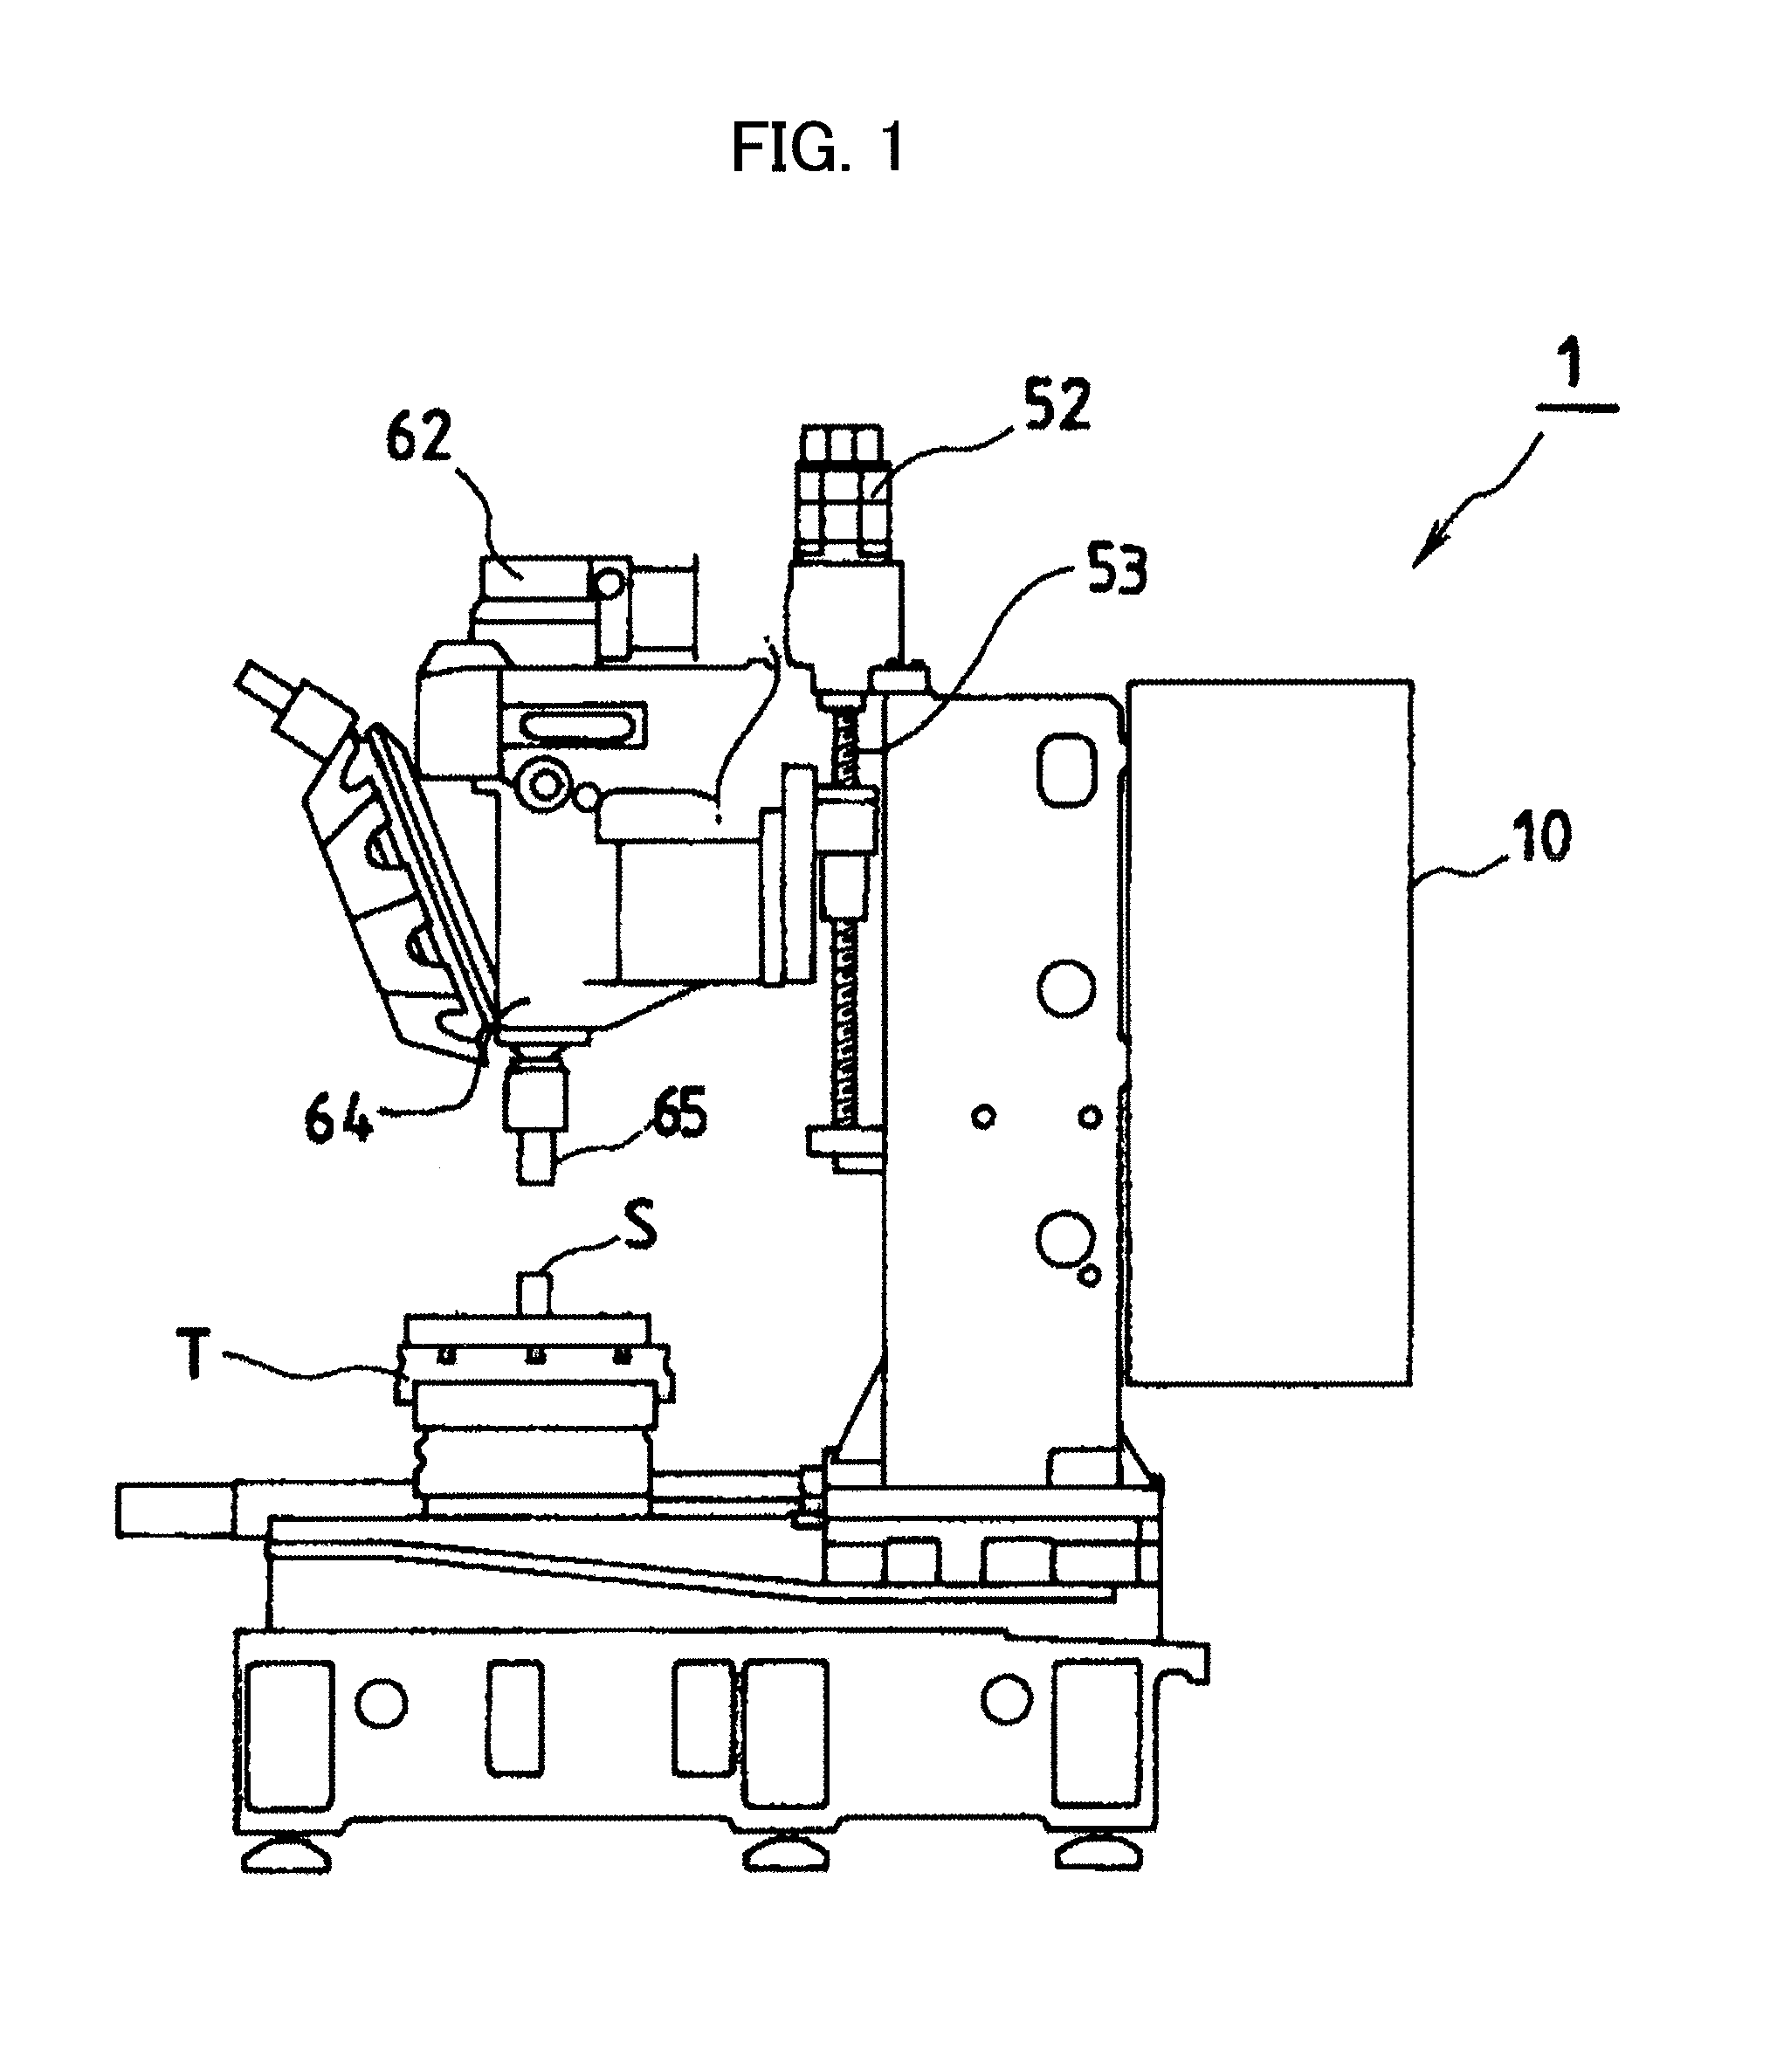 Warm-up control device for machine tool